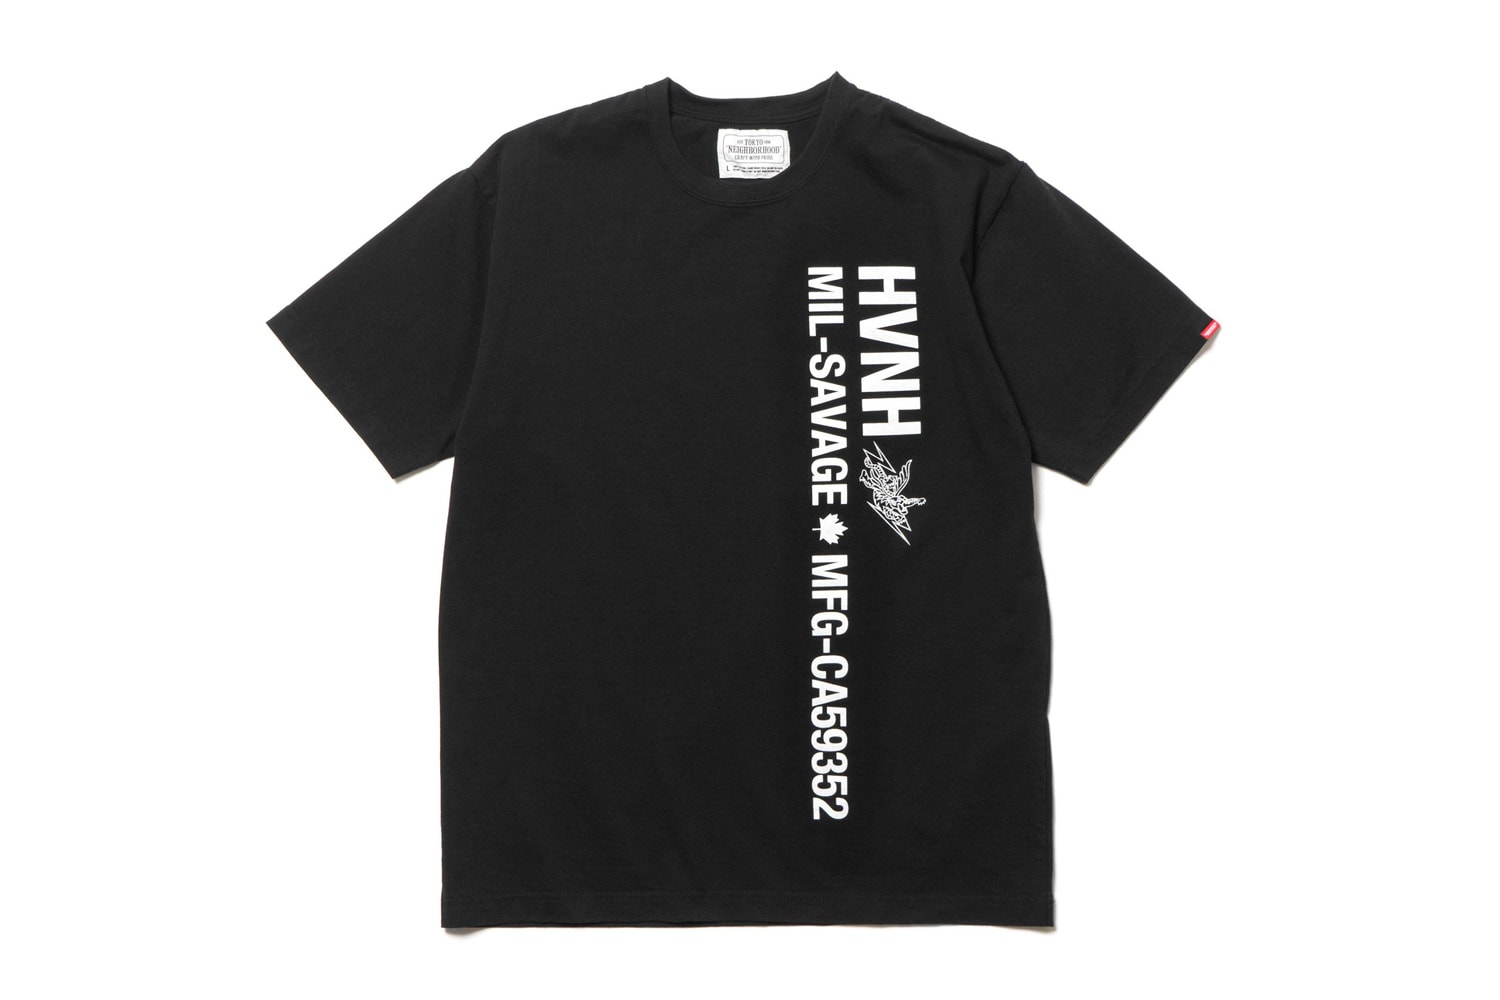 HAVEN x NEIGHBORHOOD Collection MIL-SAVAGE release date Available Now purchase